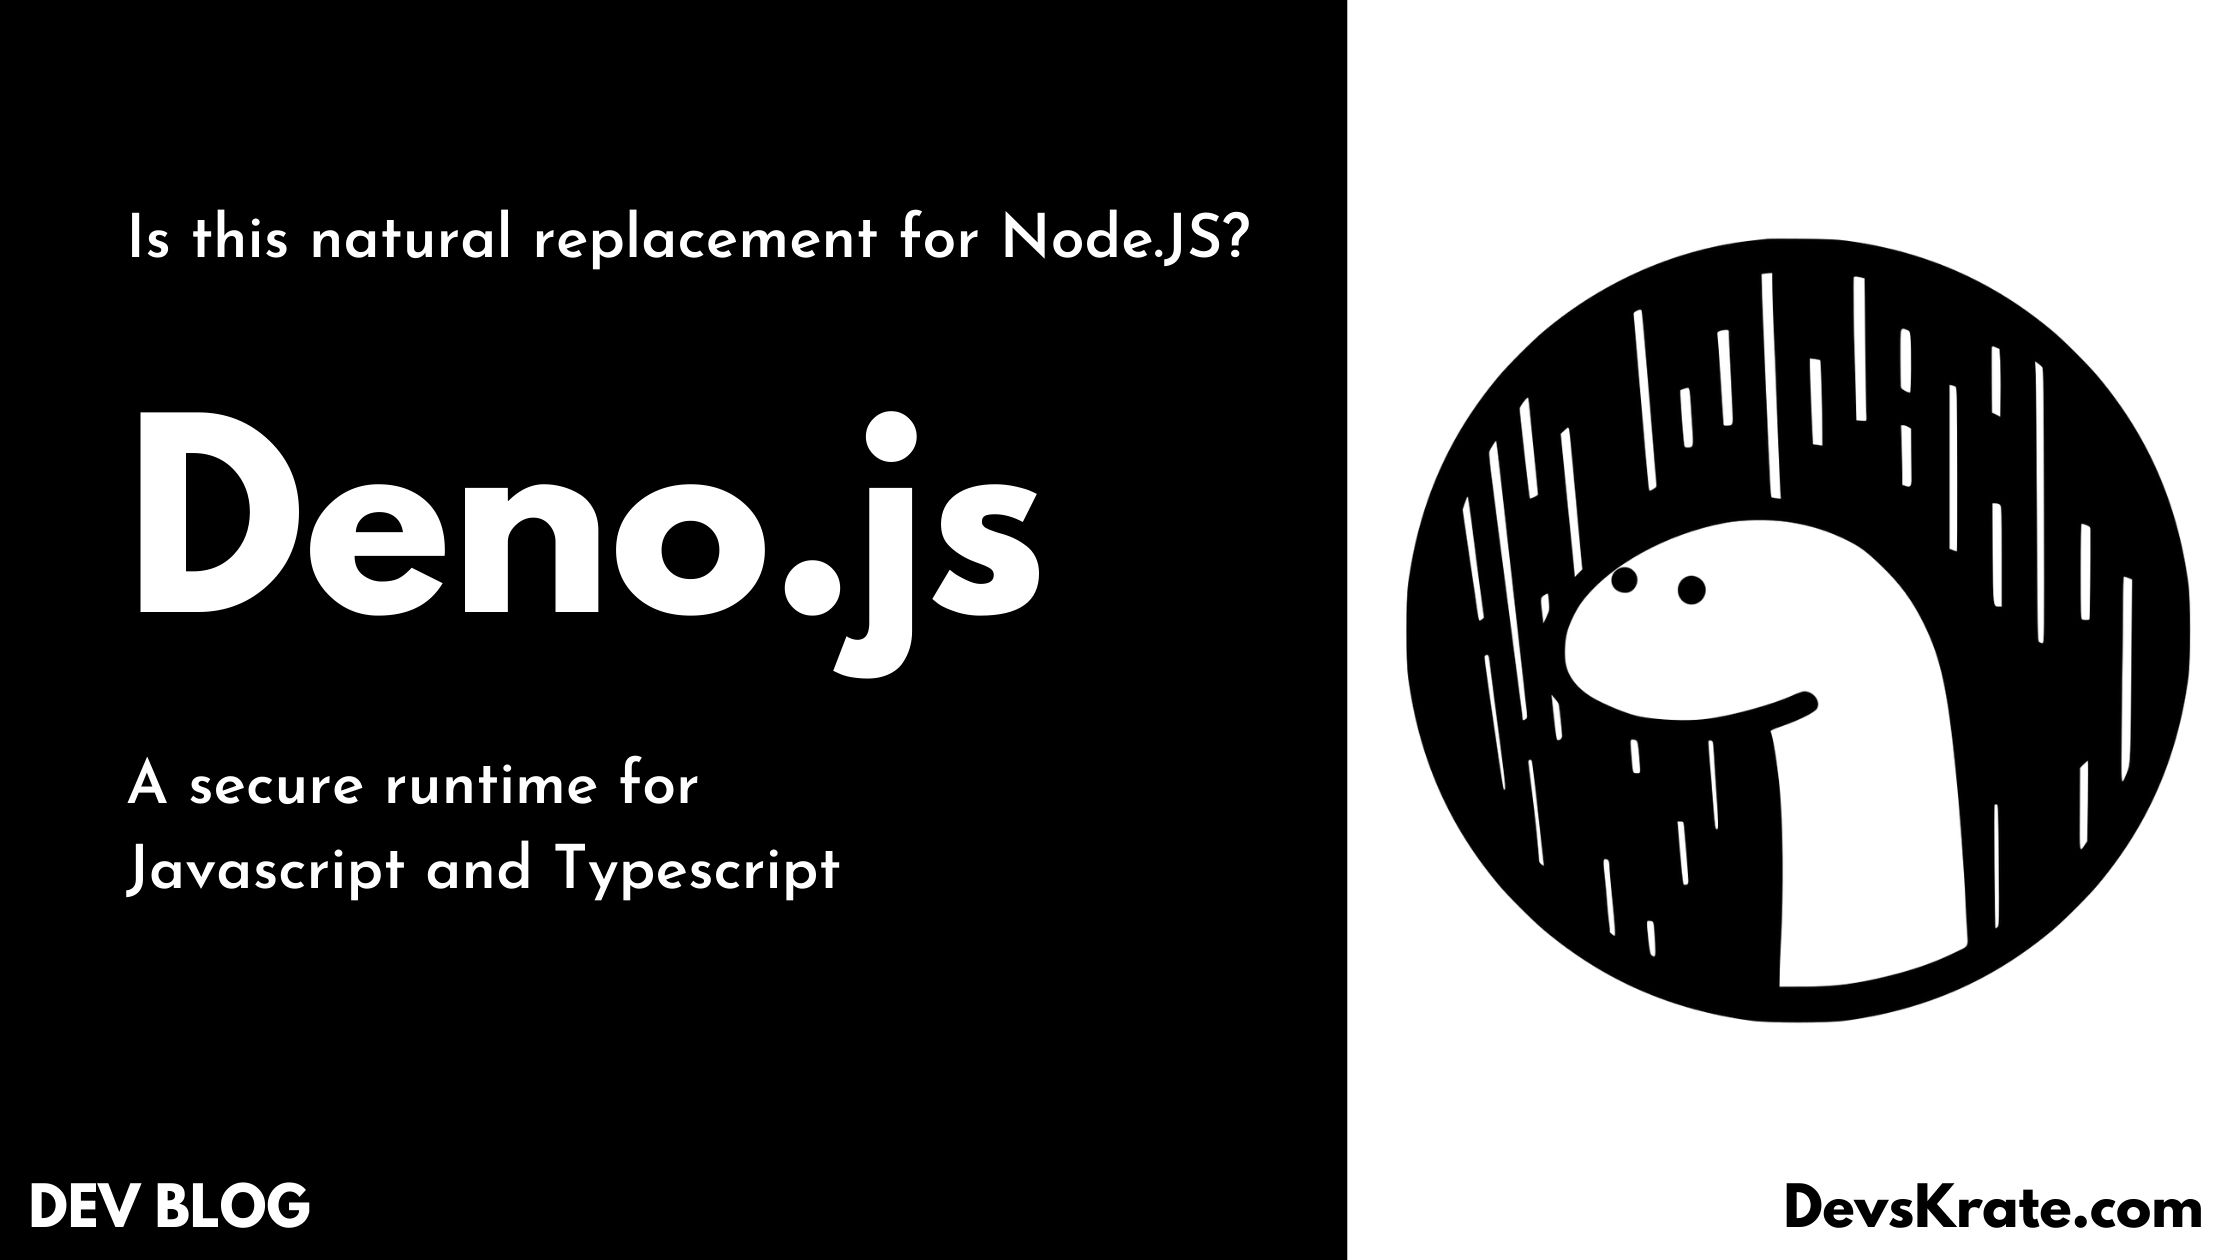 What is Deno.js? How this competes with node.js?